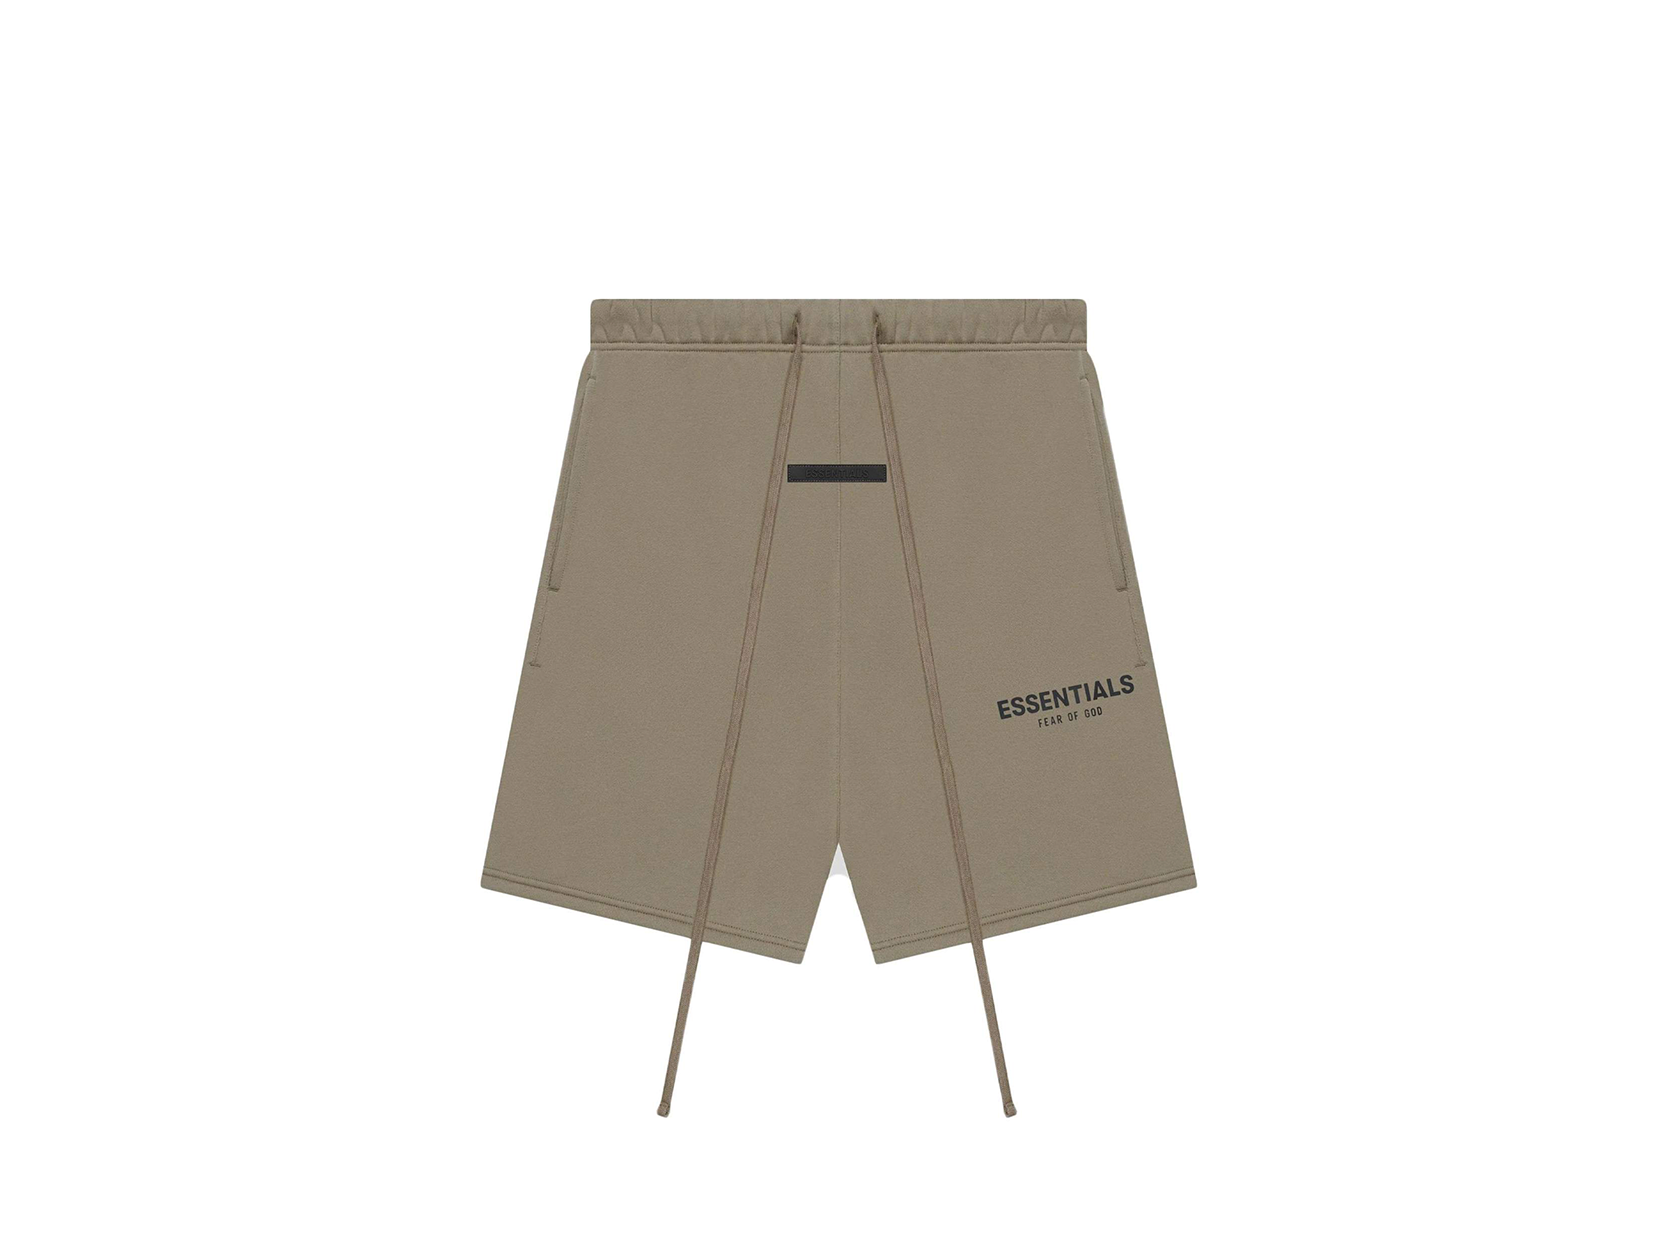 Double Boxed hoodie 199.99 FEAR OF GOD ESSENTIALS SS21 SHORTS TAUPE Double Boxed